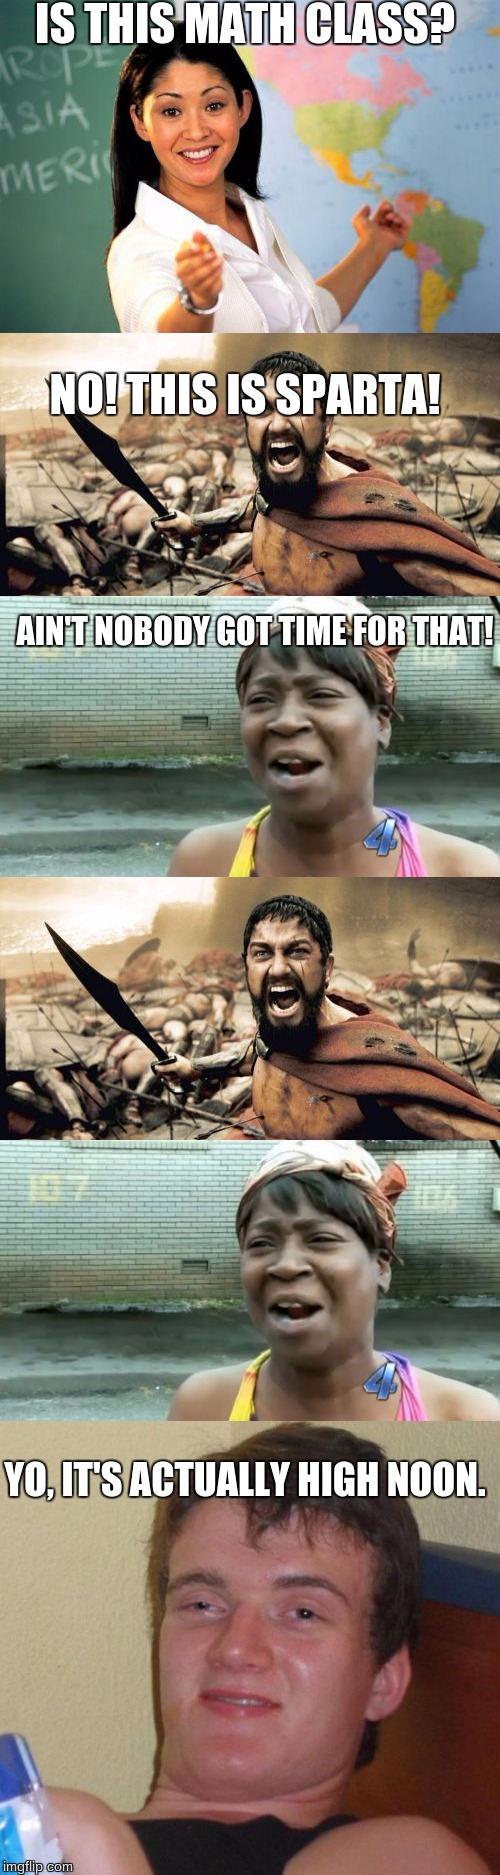 What is this? | IS THIS MATH CLASS? NO! THIS IS SPARTA! AIN'T NOBODY GOT TIME FOR THAT! YO, IT'S ACTUALLY HIGH NOON. | image tagged in sparta,unhelpful teacher,aint nobody got time for that,10 guy | made w/ Imgflip meme maker